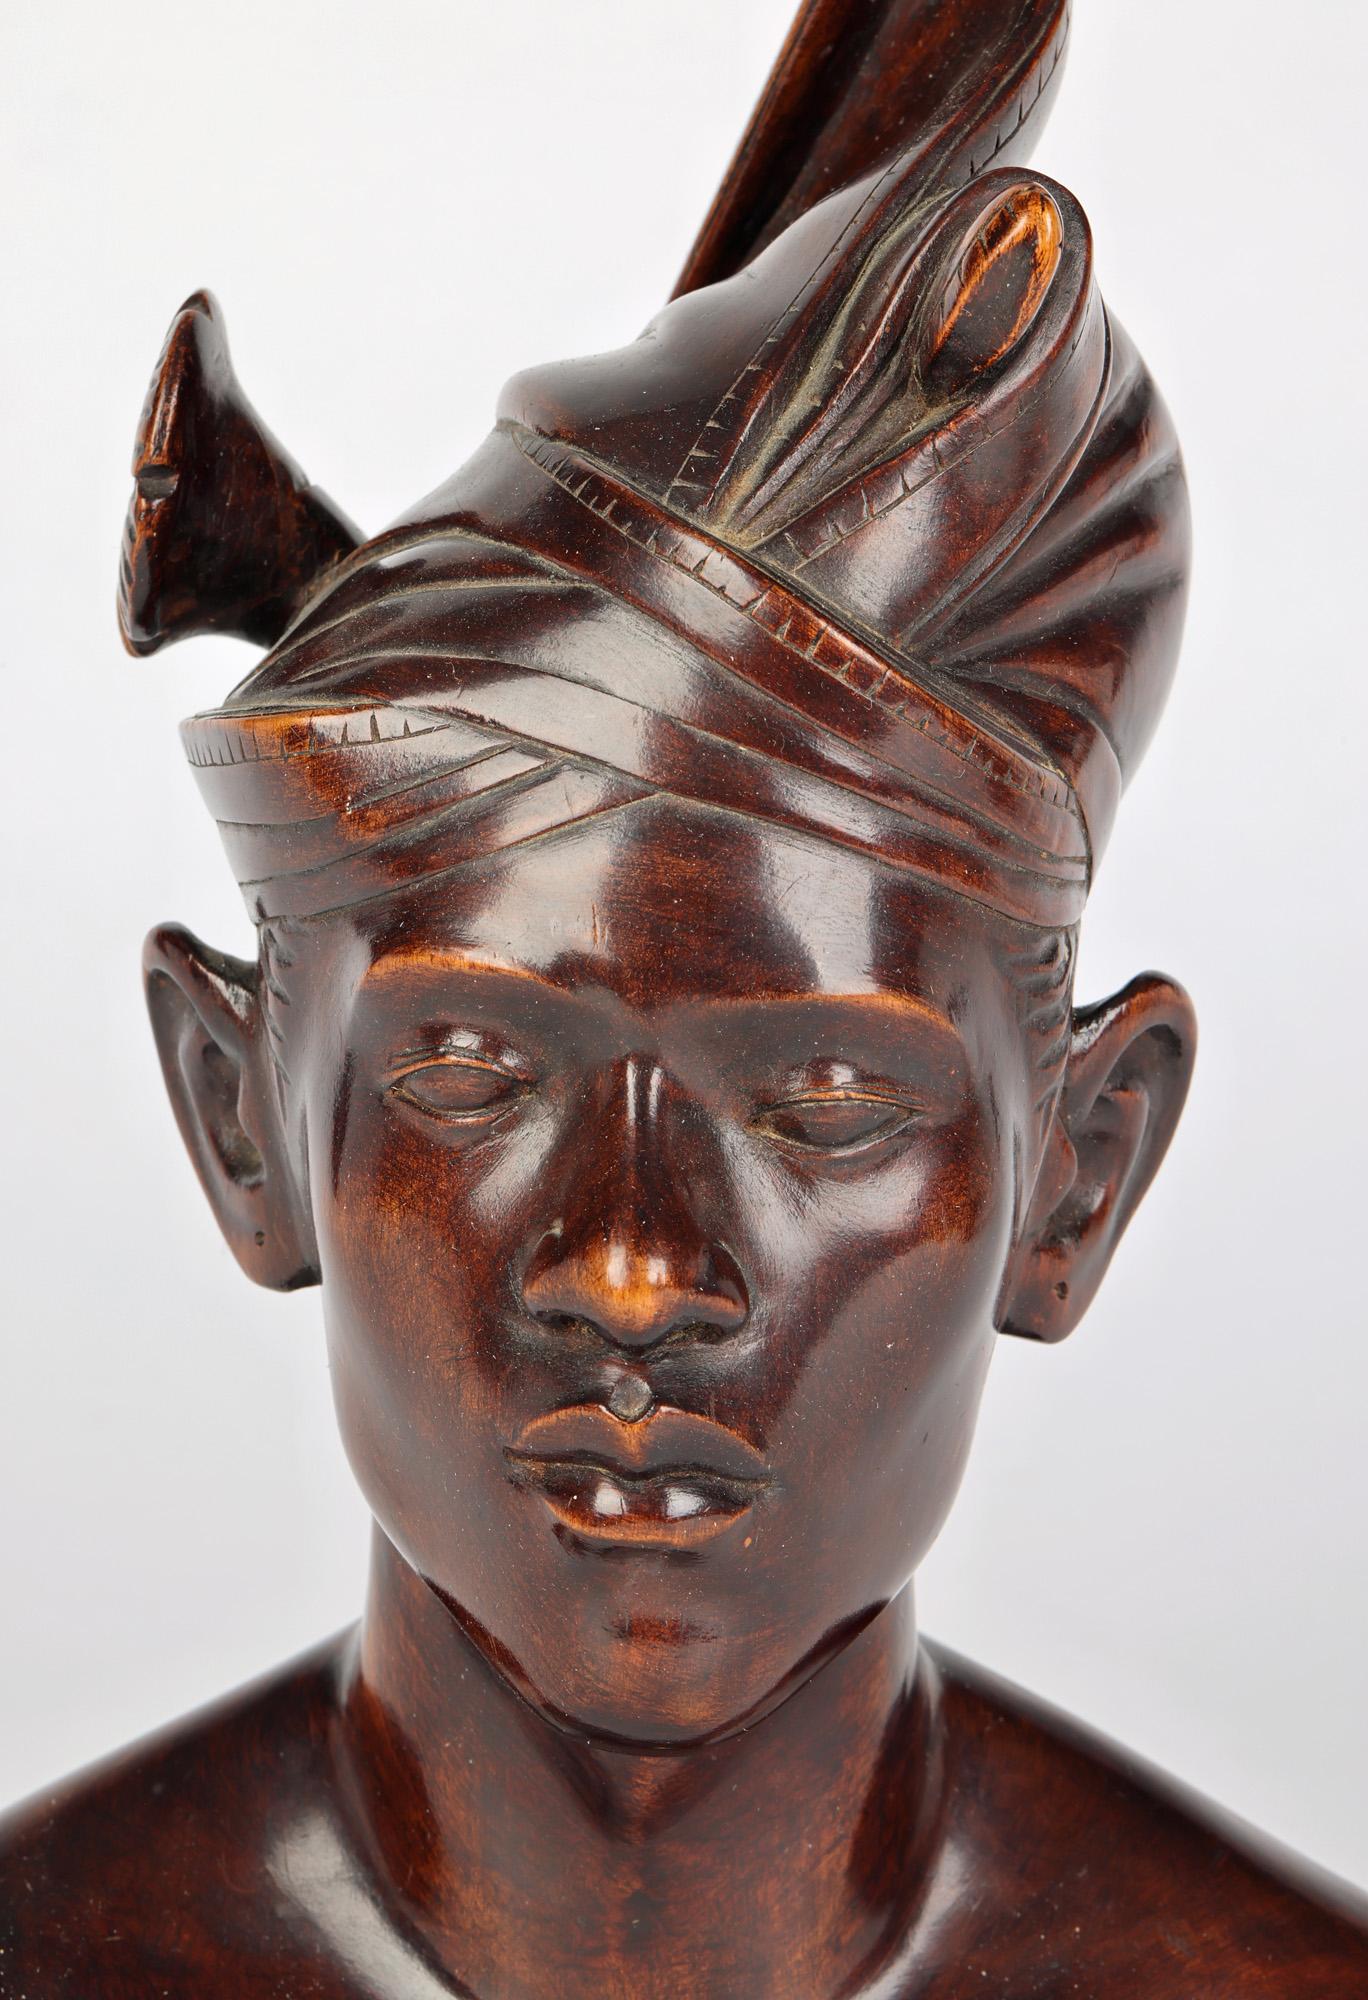 A well carved wooden portrait bust of a young man carved by a Balinese artist around the mid 20th century. The bust is carved from a single piece if wood and is well carved with good detail portraying the young man wearing a traditional headdress.